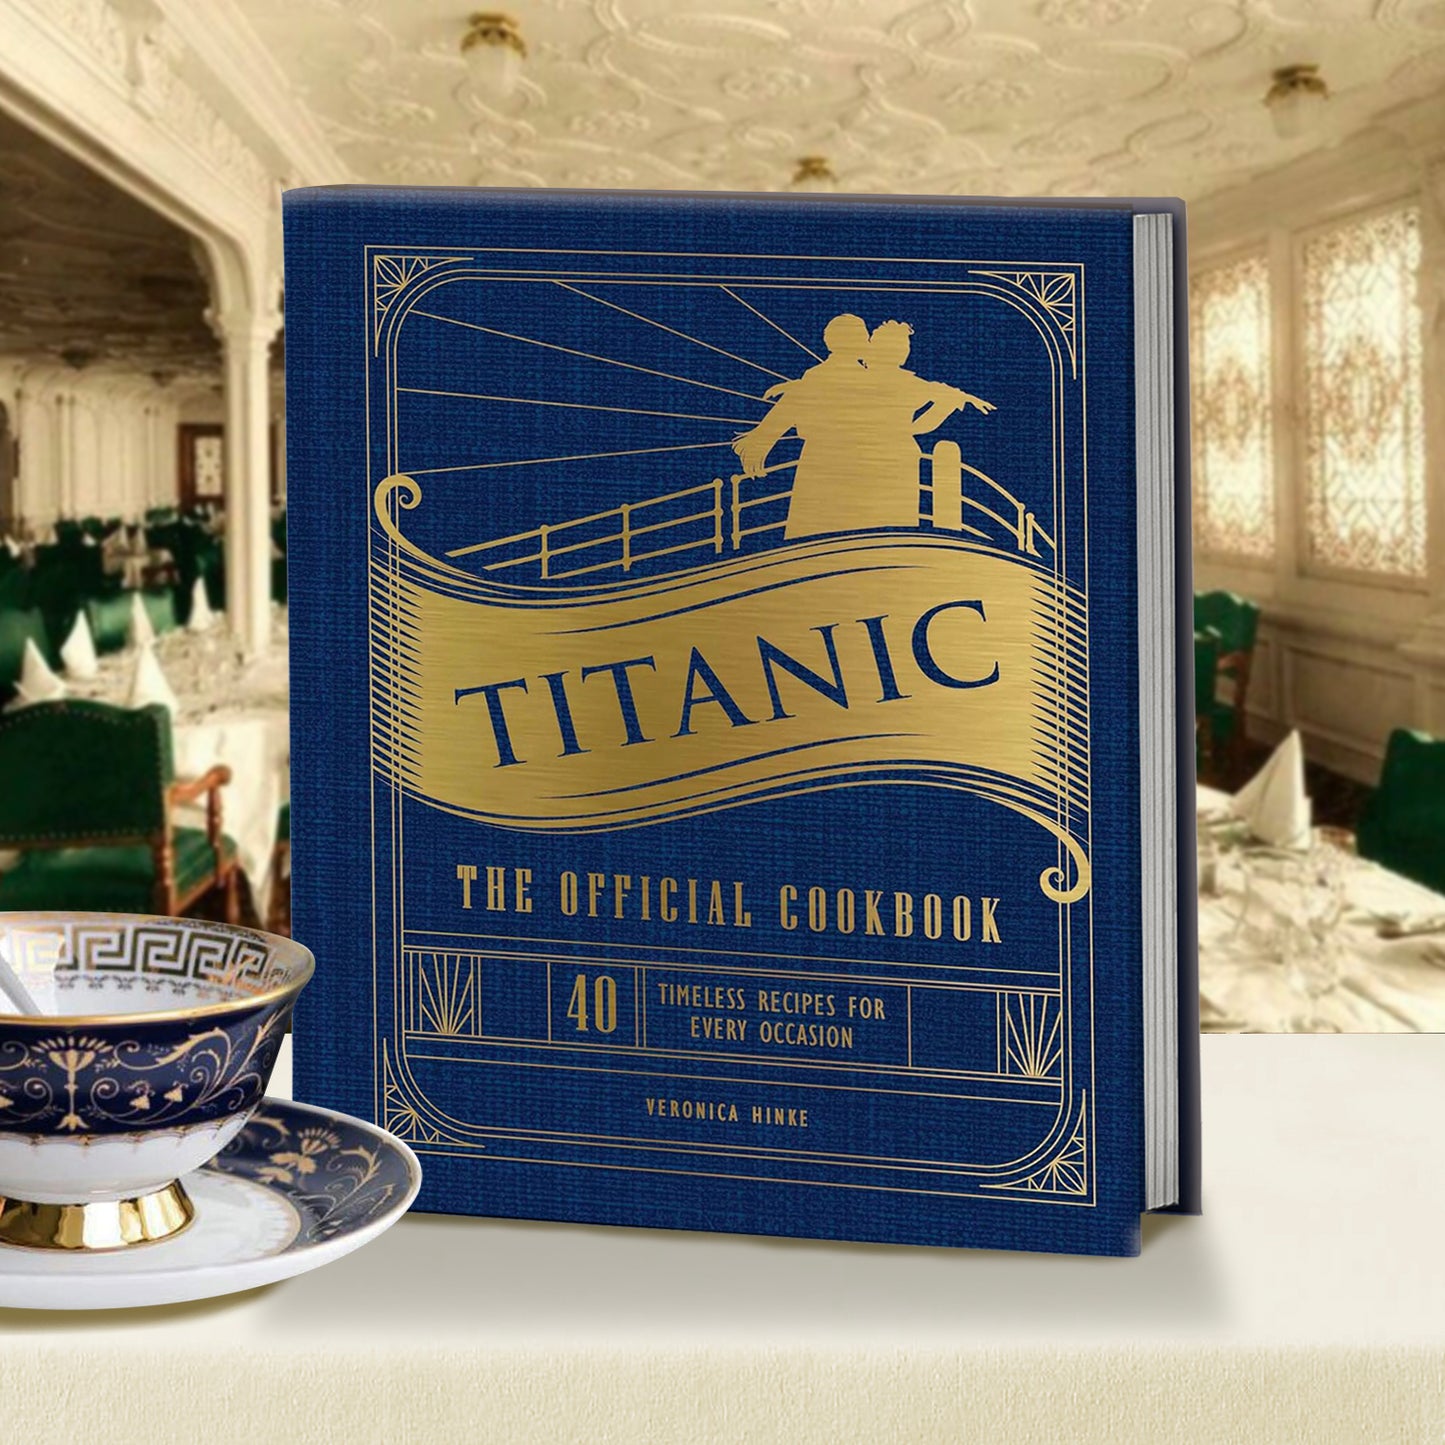 A blue book sitting on a fine dining table. The cover has gold text saying "titanic: the official cookbook." A gold-colored silhouette of Jack and Rose from the movie "titanic" is at the top. There is a blue and white saucer and tea cup sitting to the left of the cookbook.